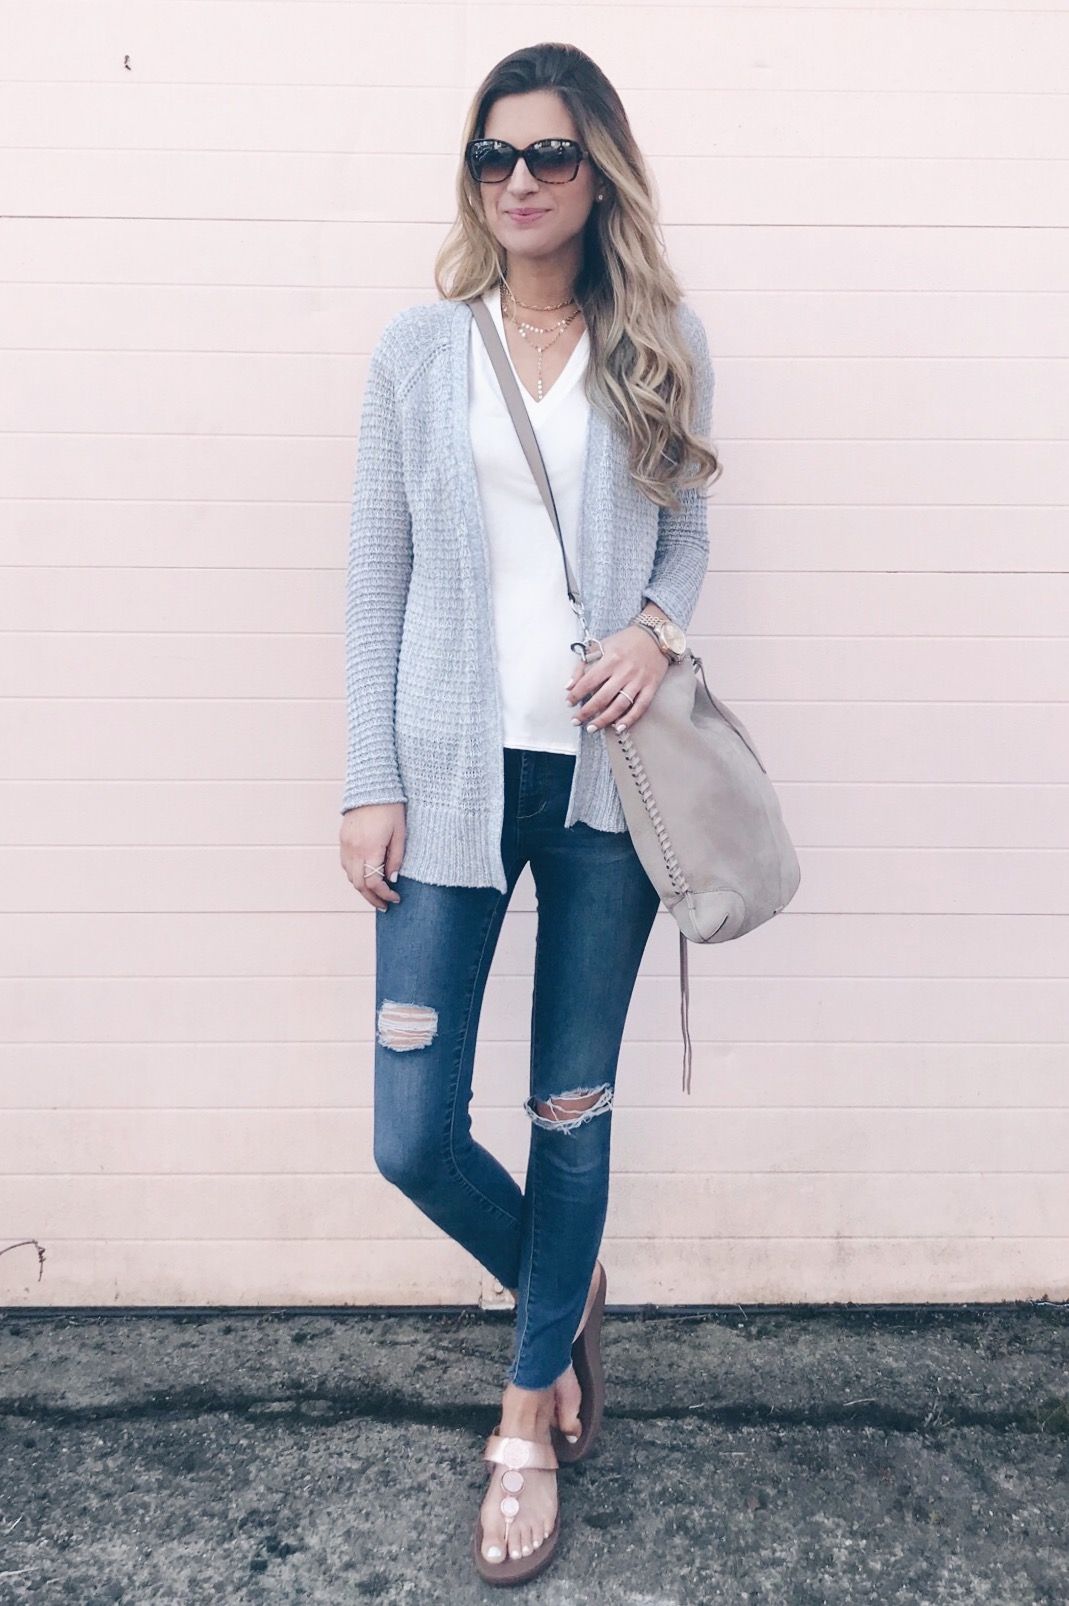 spring capsule wardrobe 2018 - casual spring outfit with skinny jeans and a blue knit cardigan over a white tee shirt on pinteresting plans connecticut fashion blog